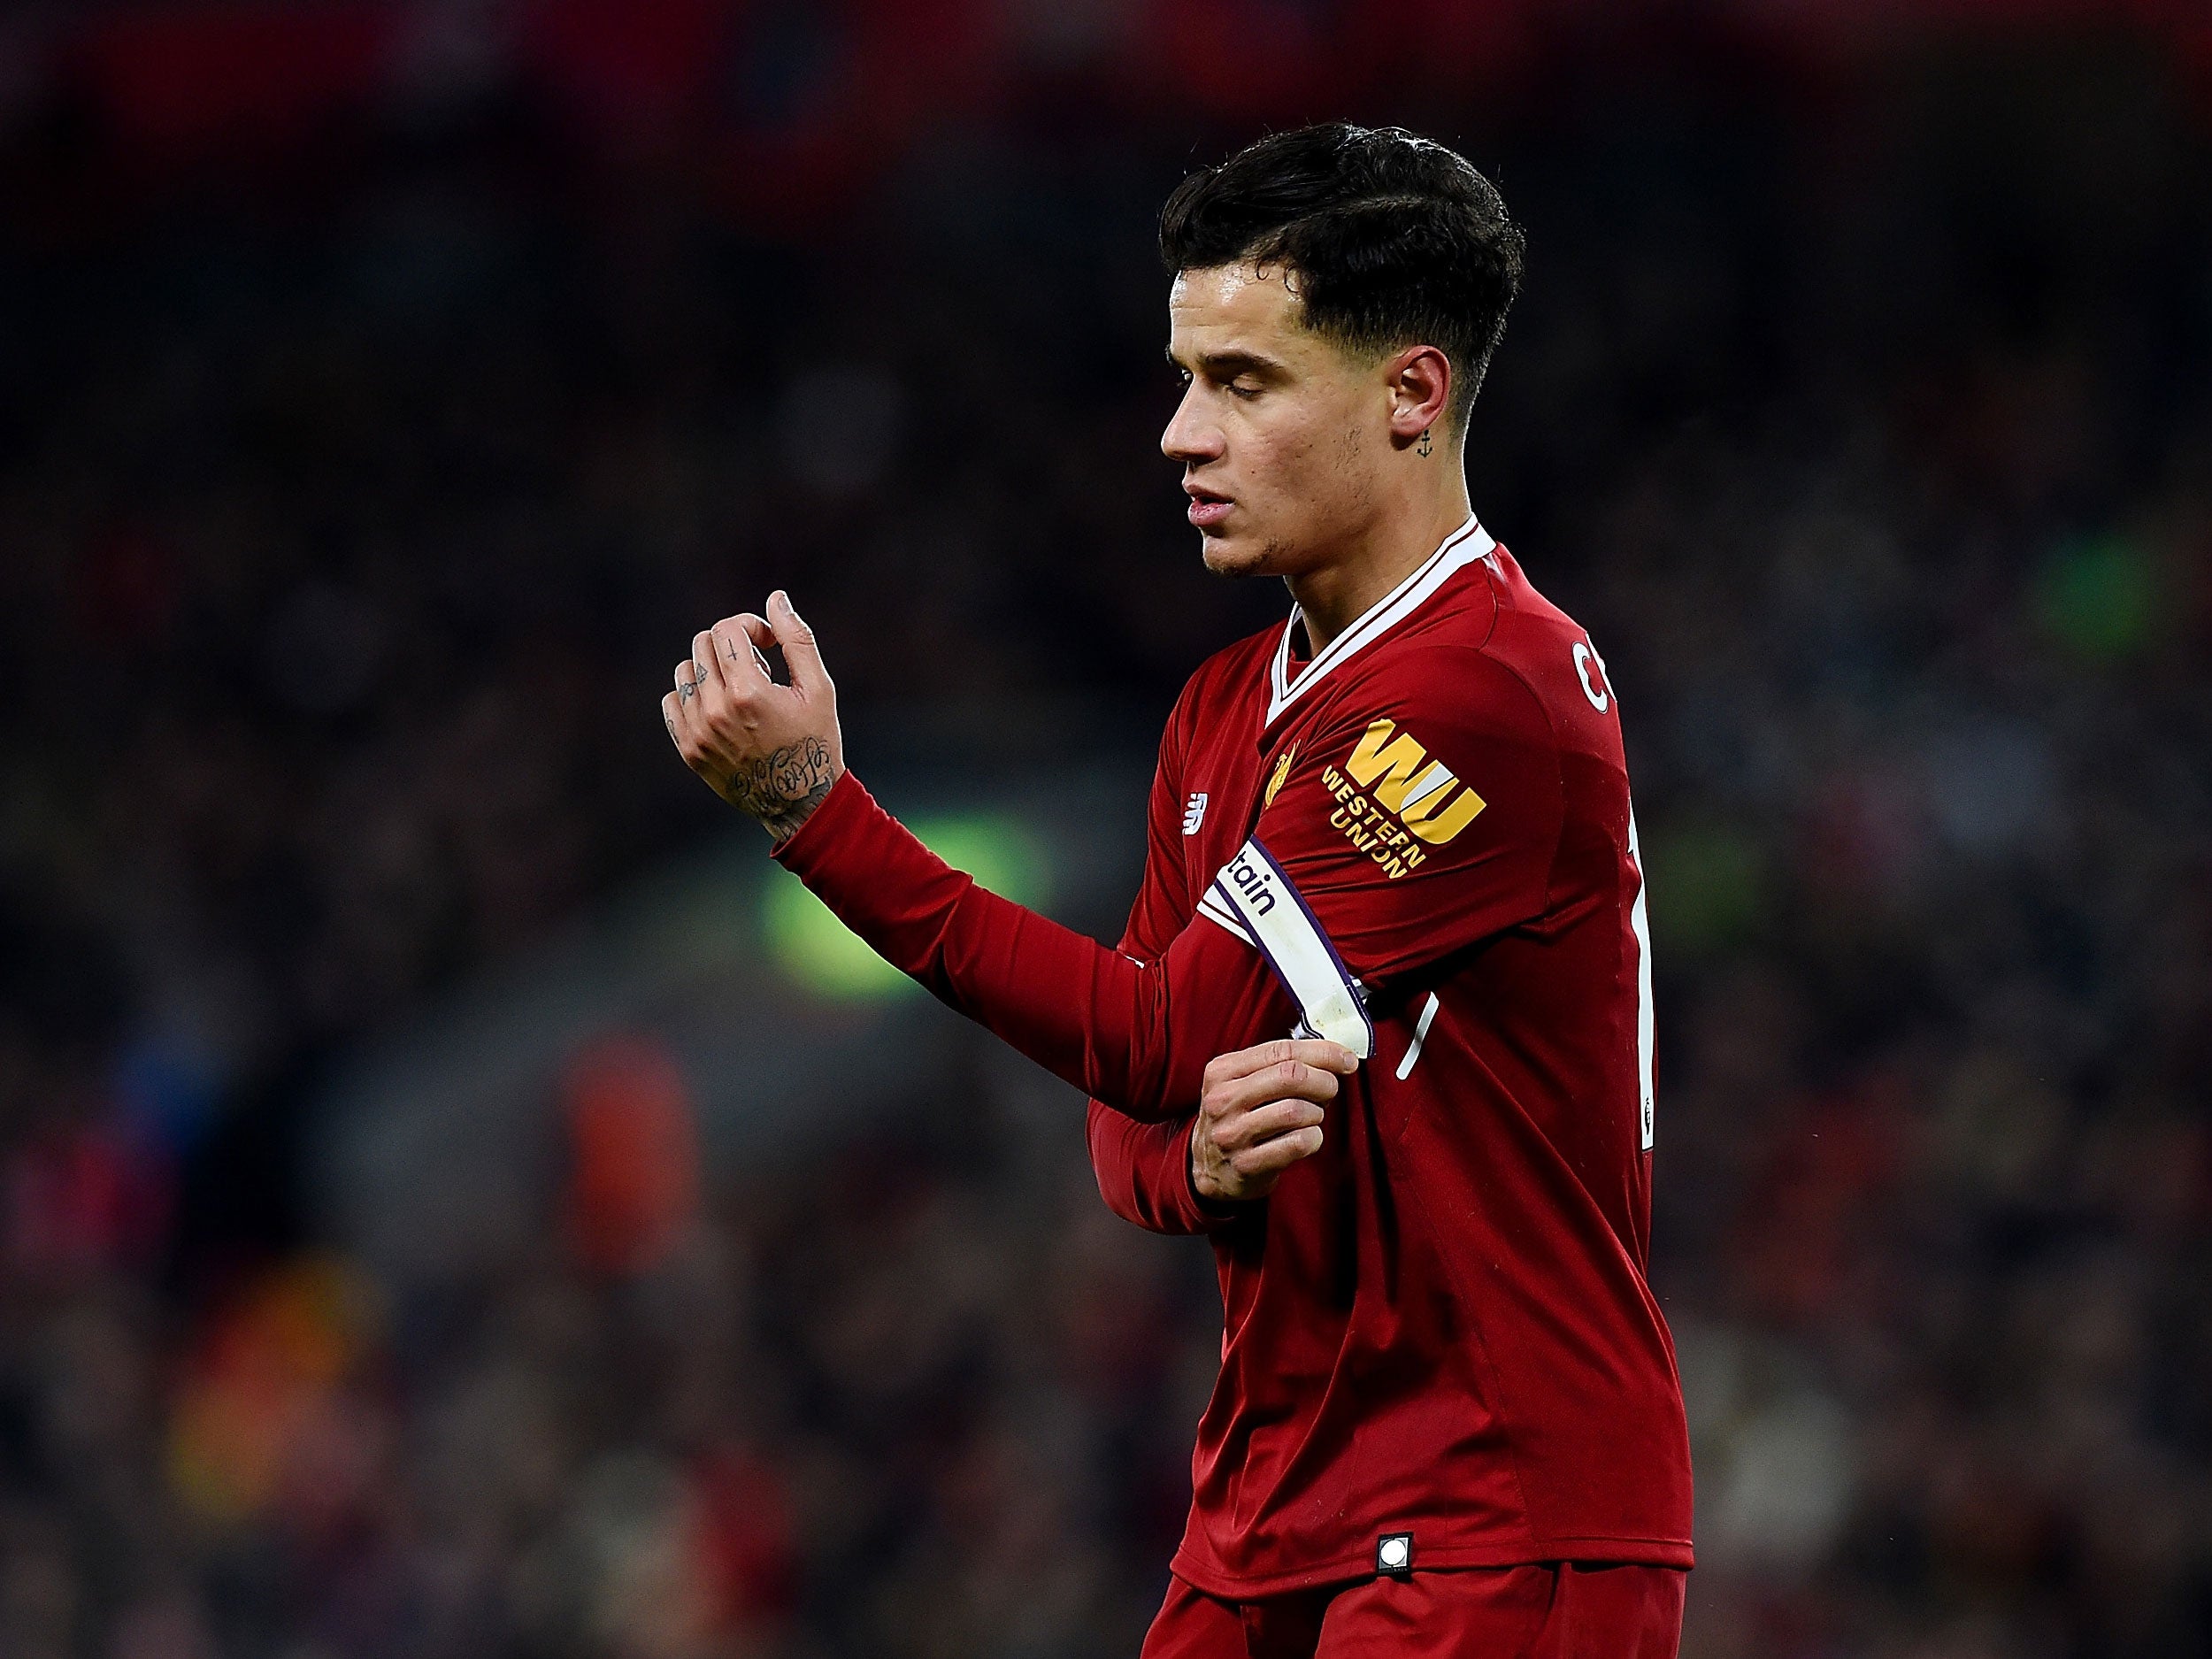 Philippe Coutinho continues to be linked with a move to Barcelona